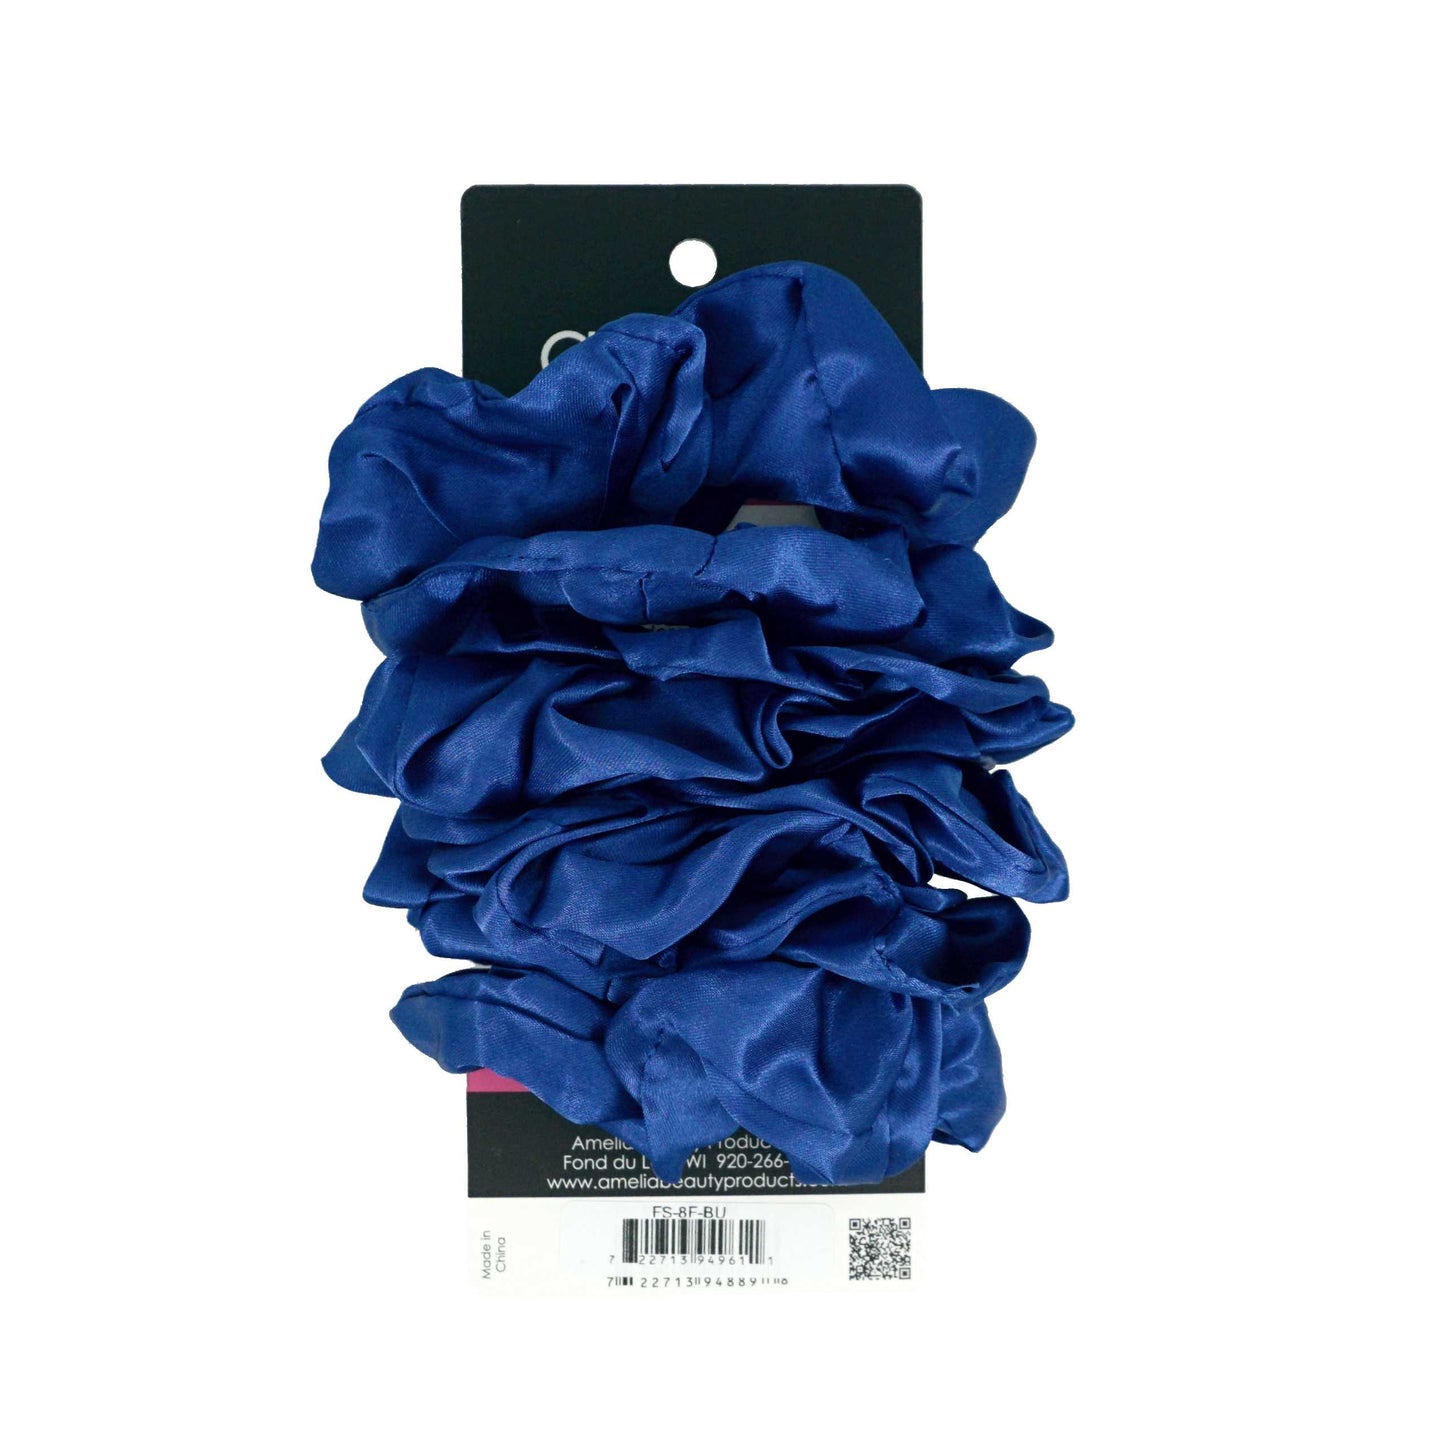 Amelia Beauty Products, Blue Satin Scrunchies, 3.5in Diameter, Gentle on Hair, Strong Hold, No Snag, No Dents or Creases. 8 Pack